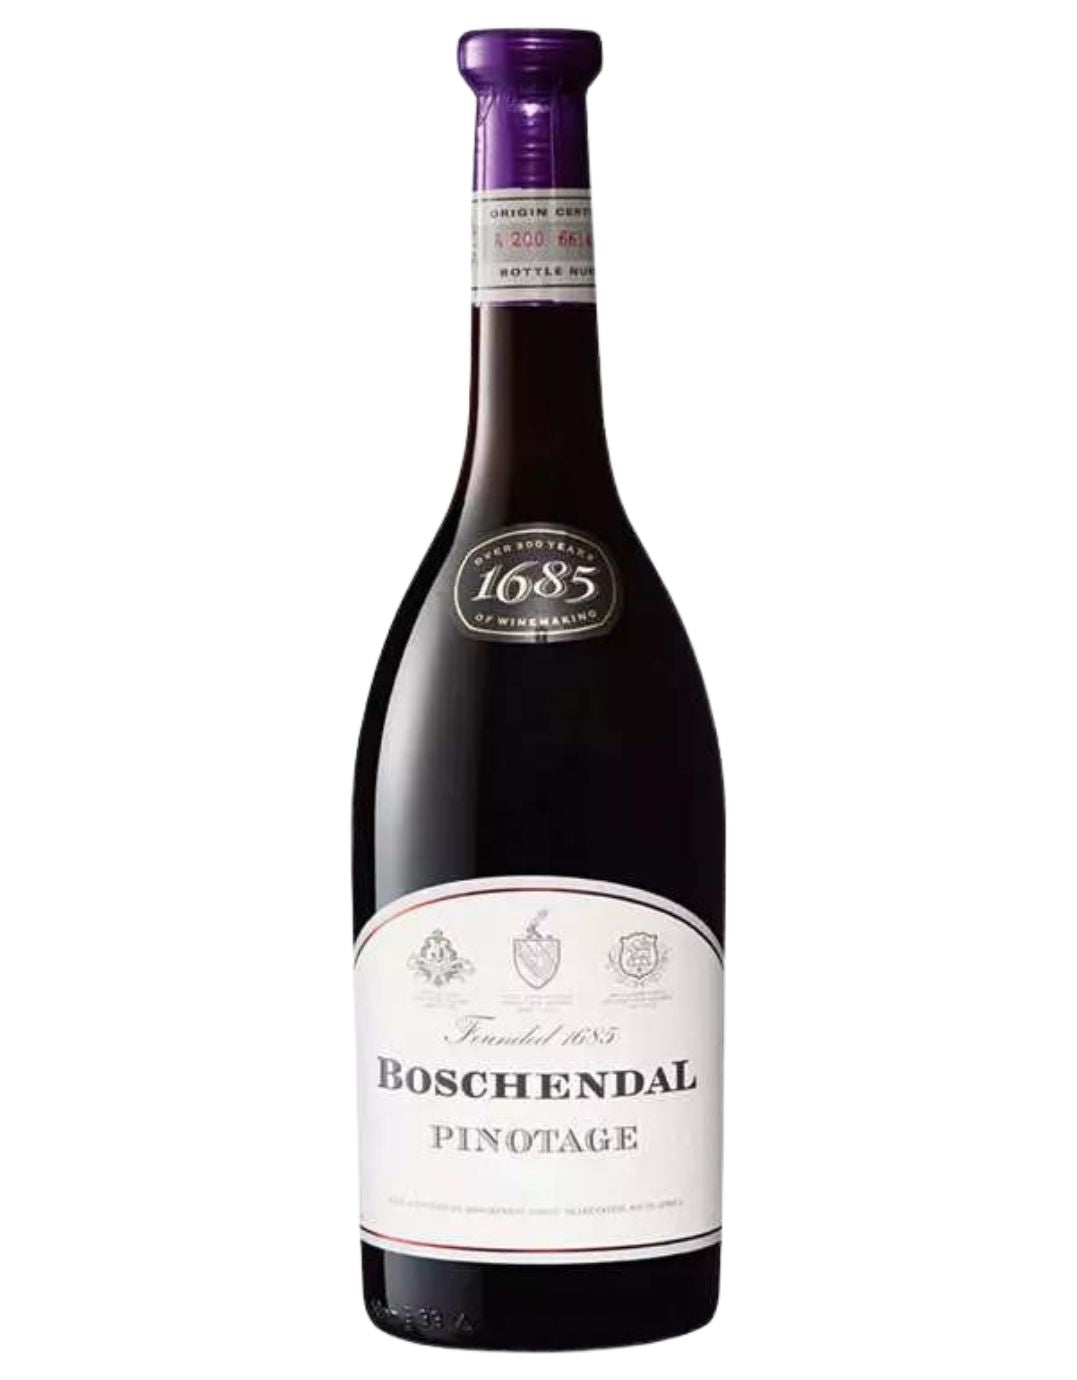 Buy Boschendal 1685 Pinotage 2019 online - WineStore now The